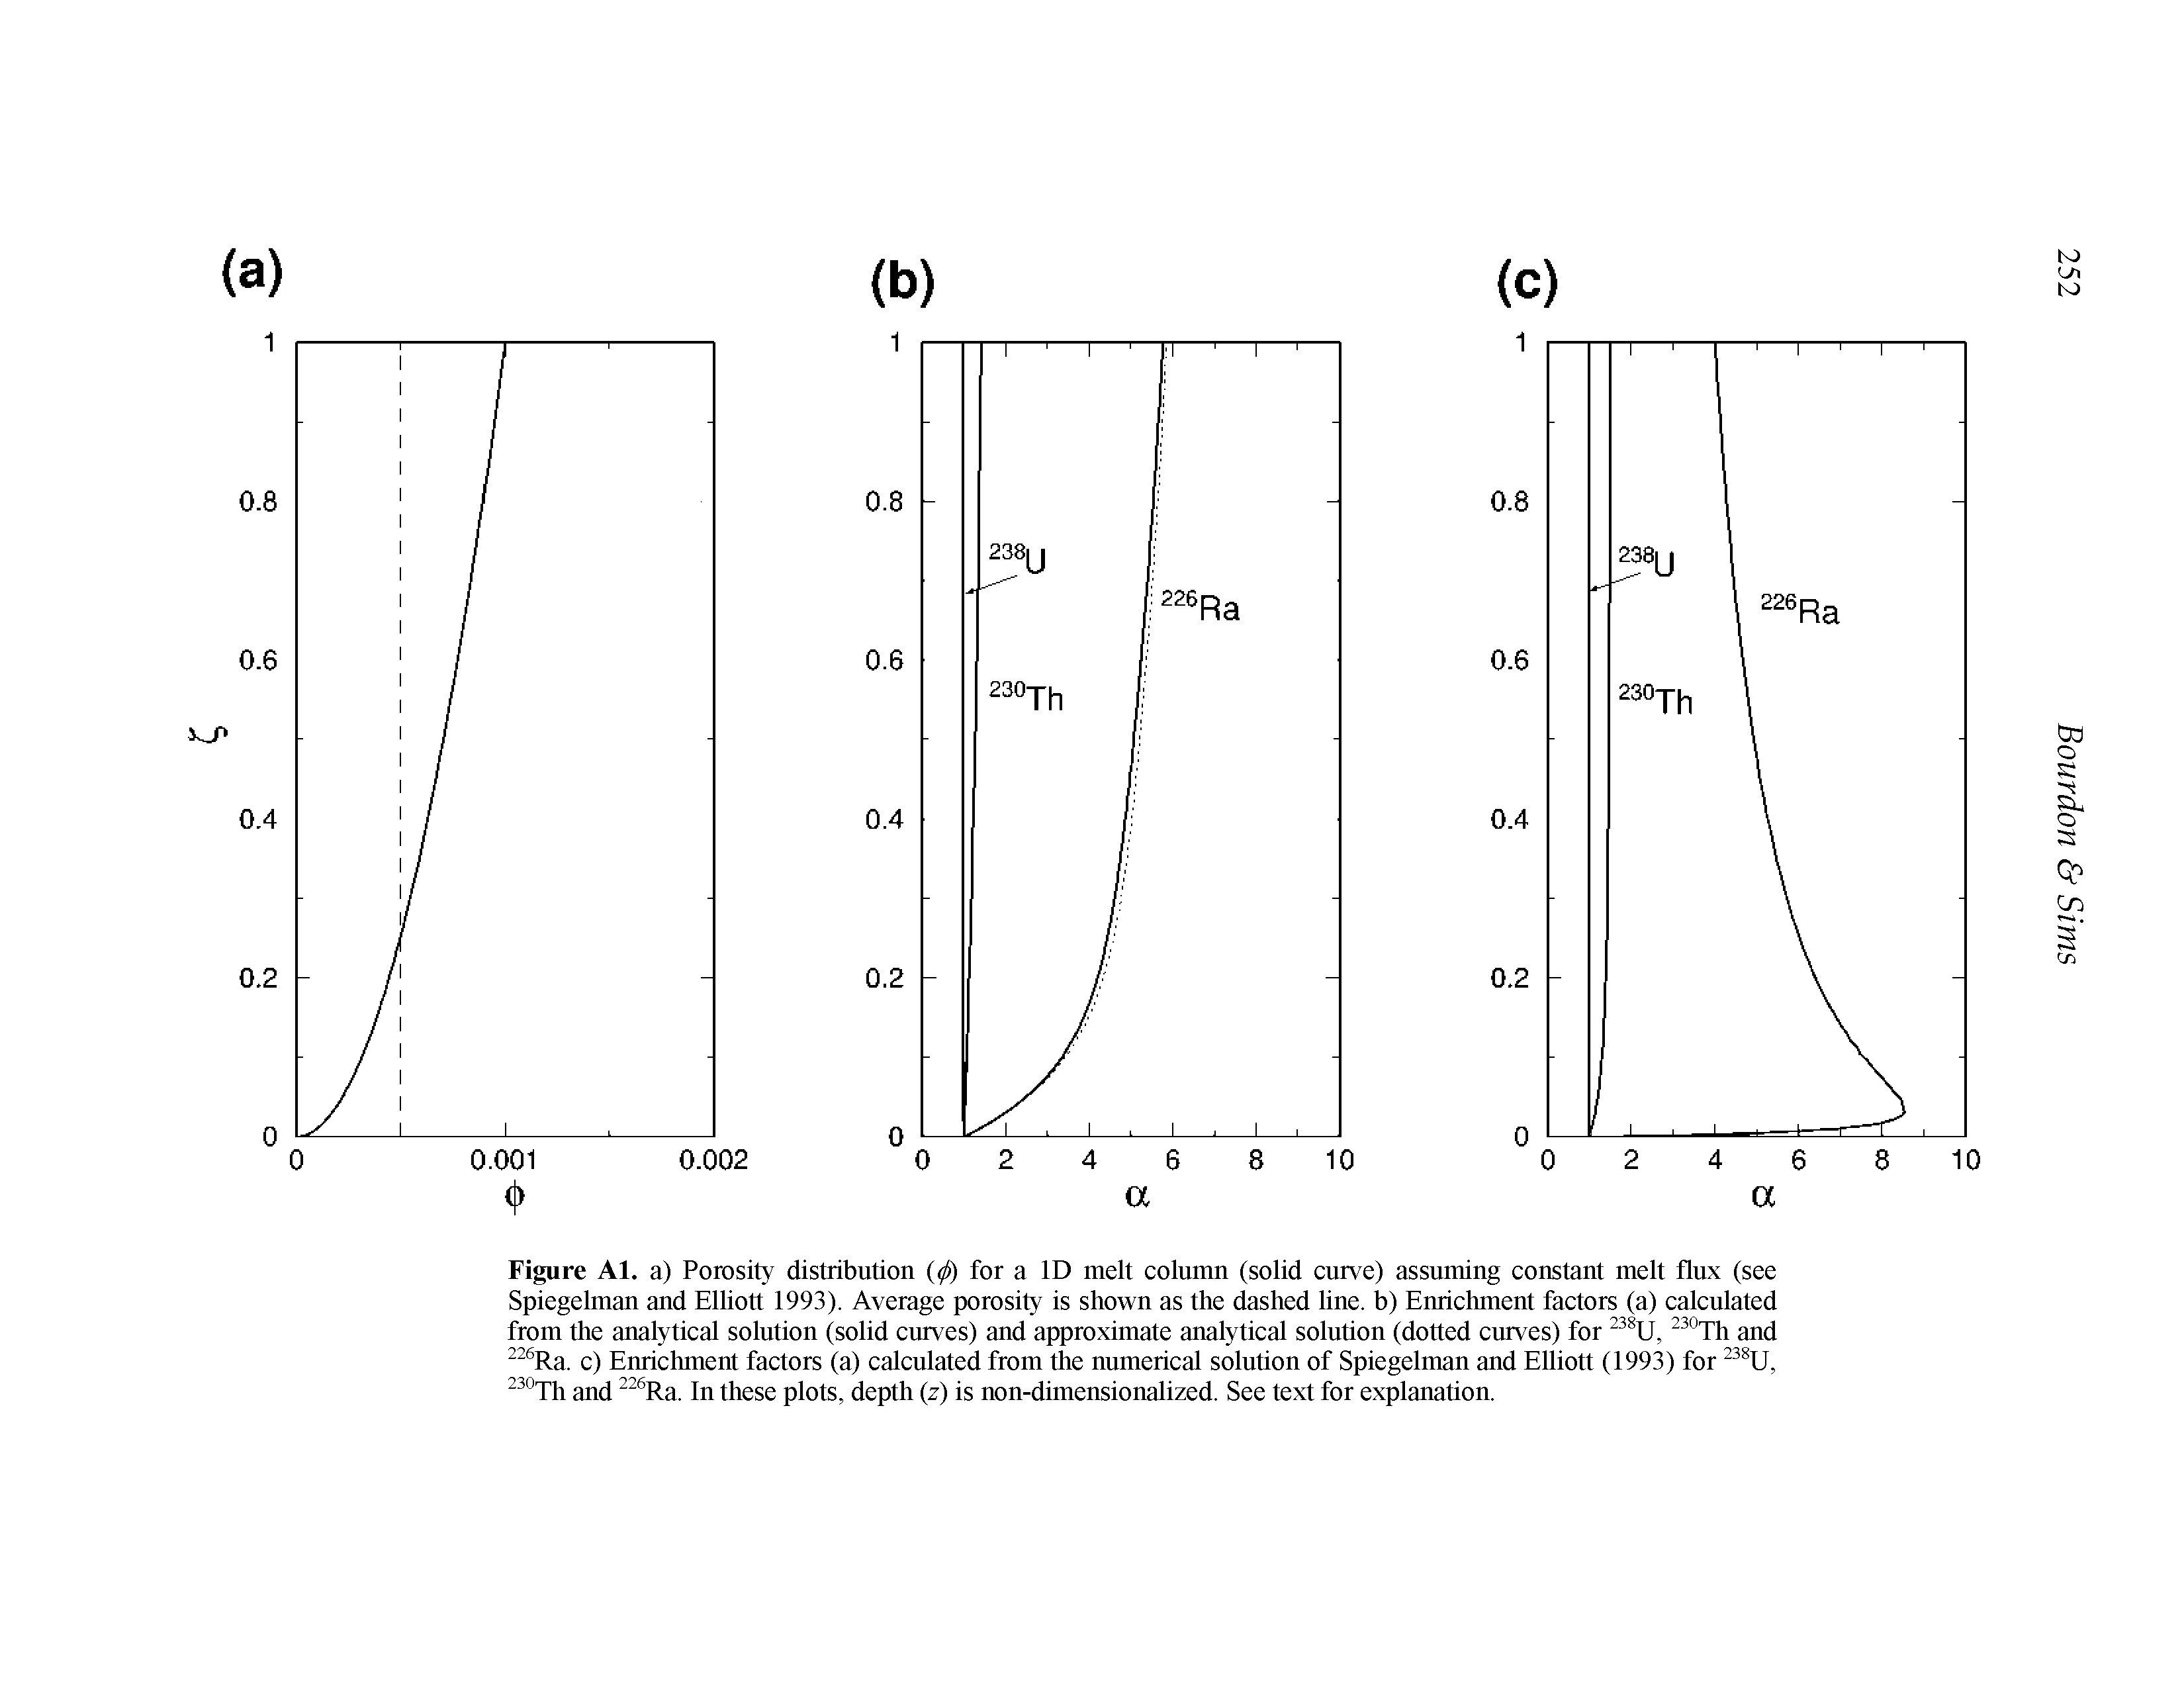 Figure Al. a) Porosity distribution for a ID melt column (solid curve) assuming constant melt flux (see Spiegelman and Elliott 1993). Average porosity is shown as the dashed line, b) Emichment factors (a) calculated from the analytical solution (solid curves) and approximate analytical solution (dotted curves) for °Th and Ra. c) Emichment factors (a) calculated from the numerical solution of Spiegelman and Elliott (1993) for °Th and Ra. In these plots, depth (z) is non-dimensionalized. See text for explanation.